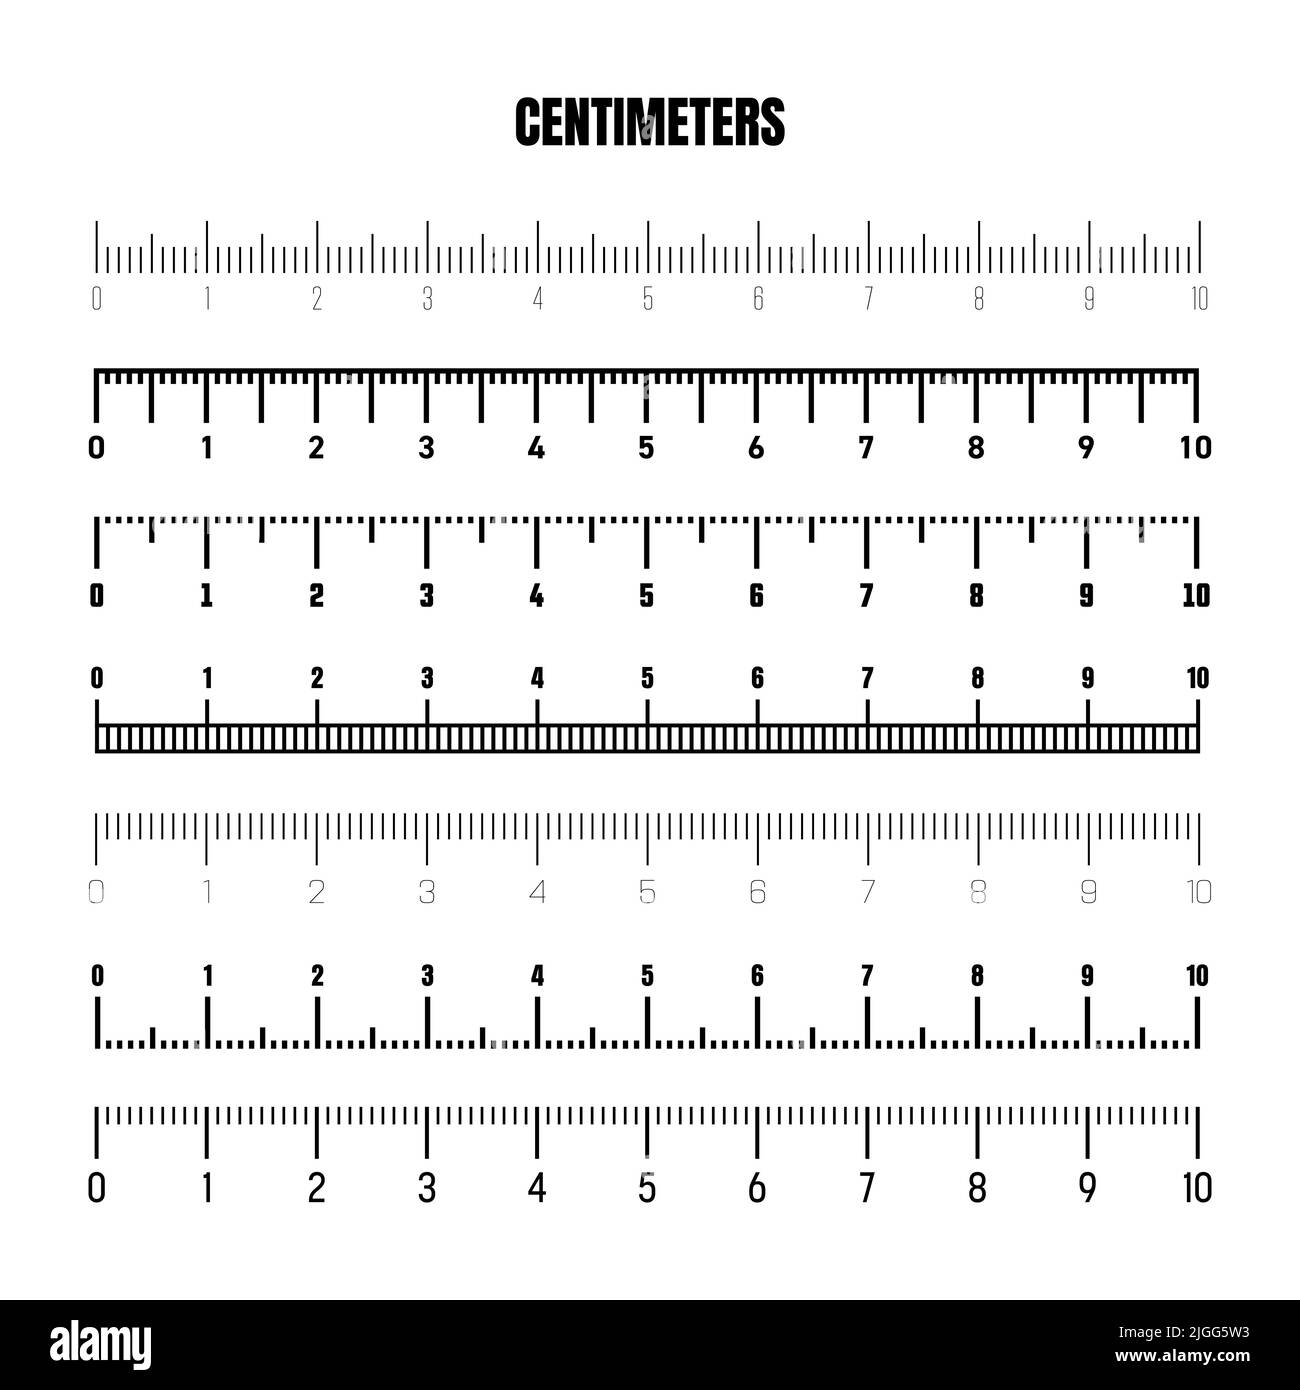 https://c8.alamy.com/comp/2JGG5W3/realistic-black-centimeter-scale-for-measuring-length-or-height-various-measurement-scales-with-divisions-ruler-tape-measure-marks-size-indicators-2JGG5W3.jpg